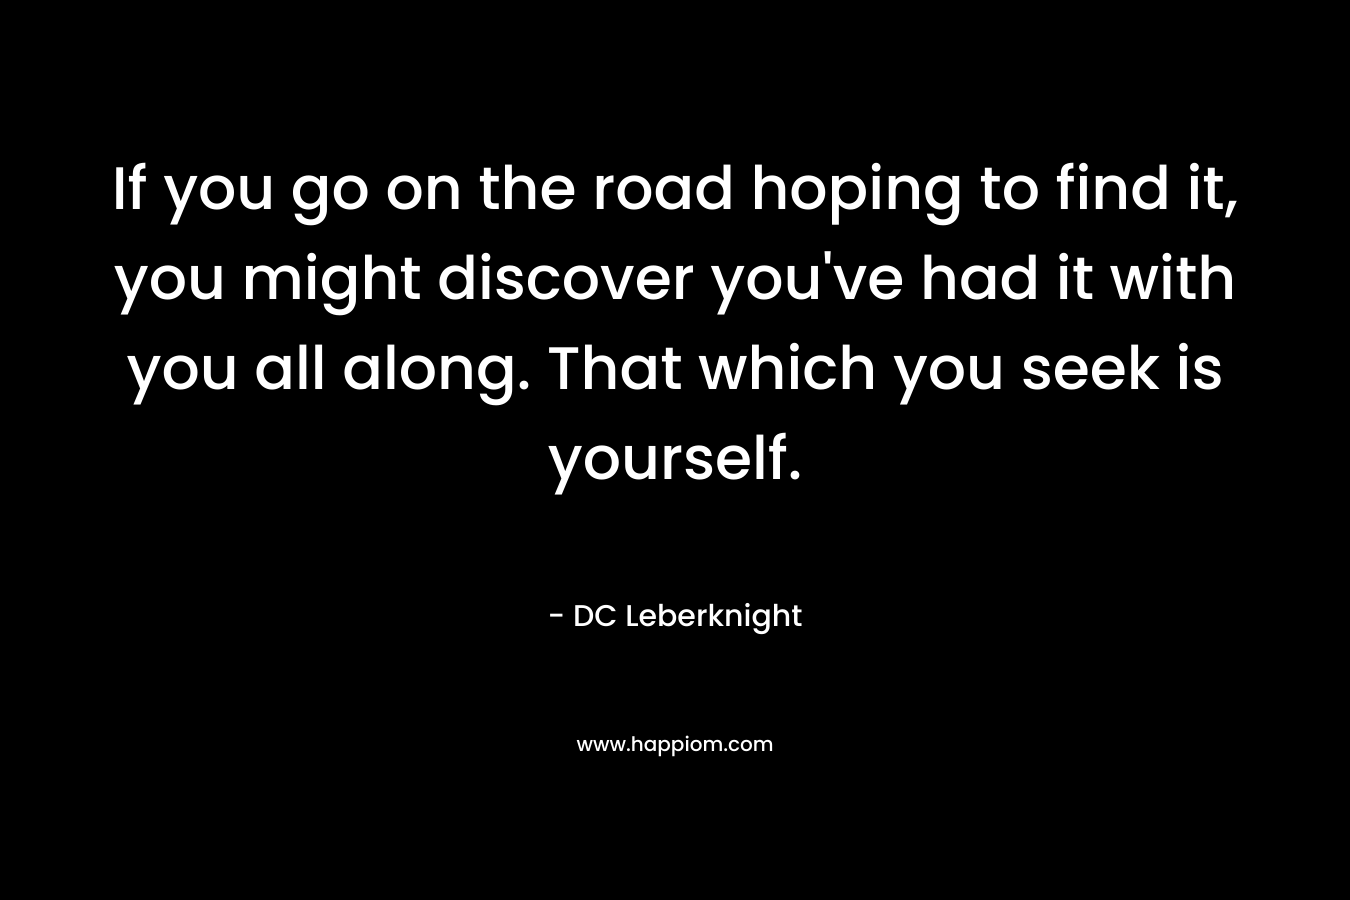 If you go on the road hoping to find it, you might discover you've had it with you all along. That which you seek is yourself.